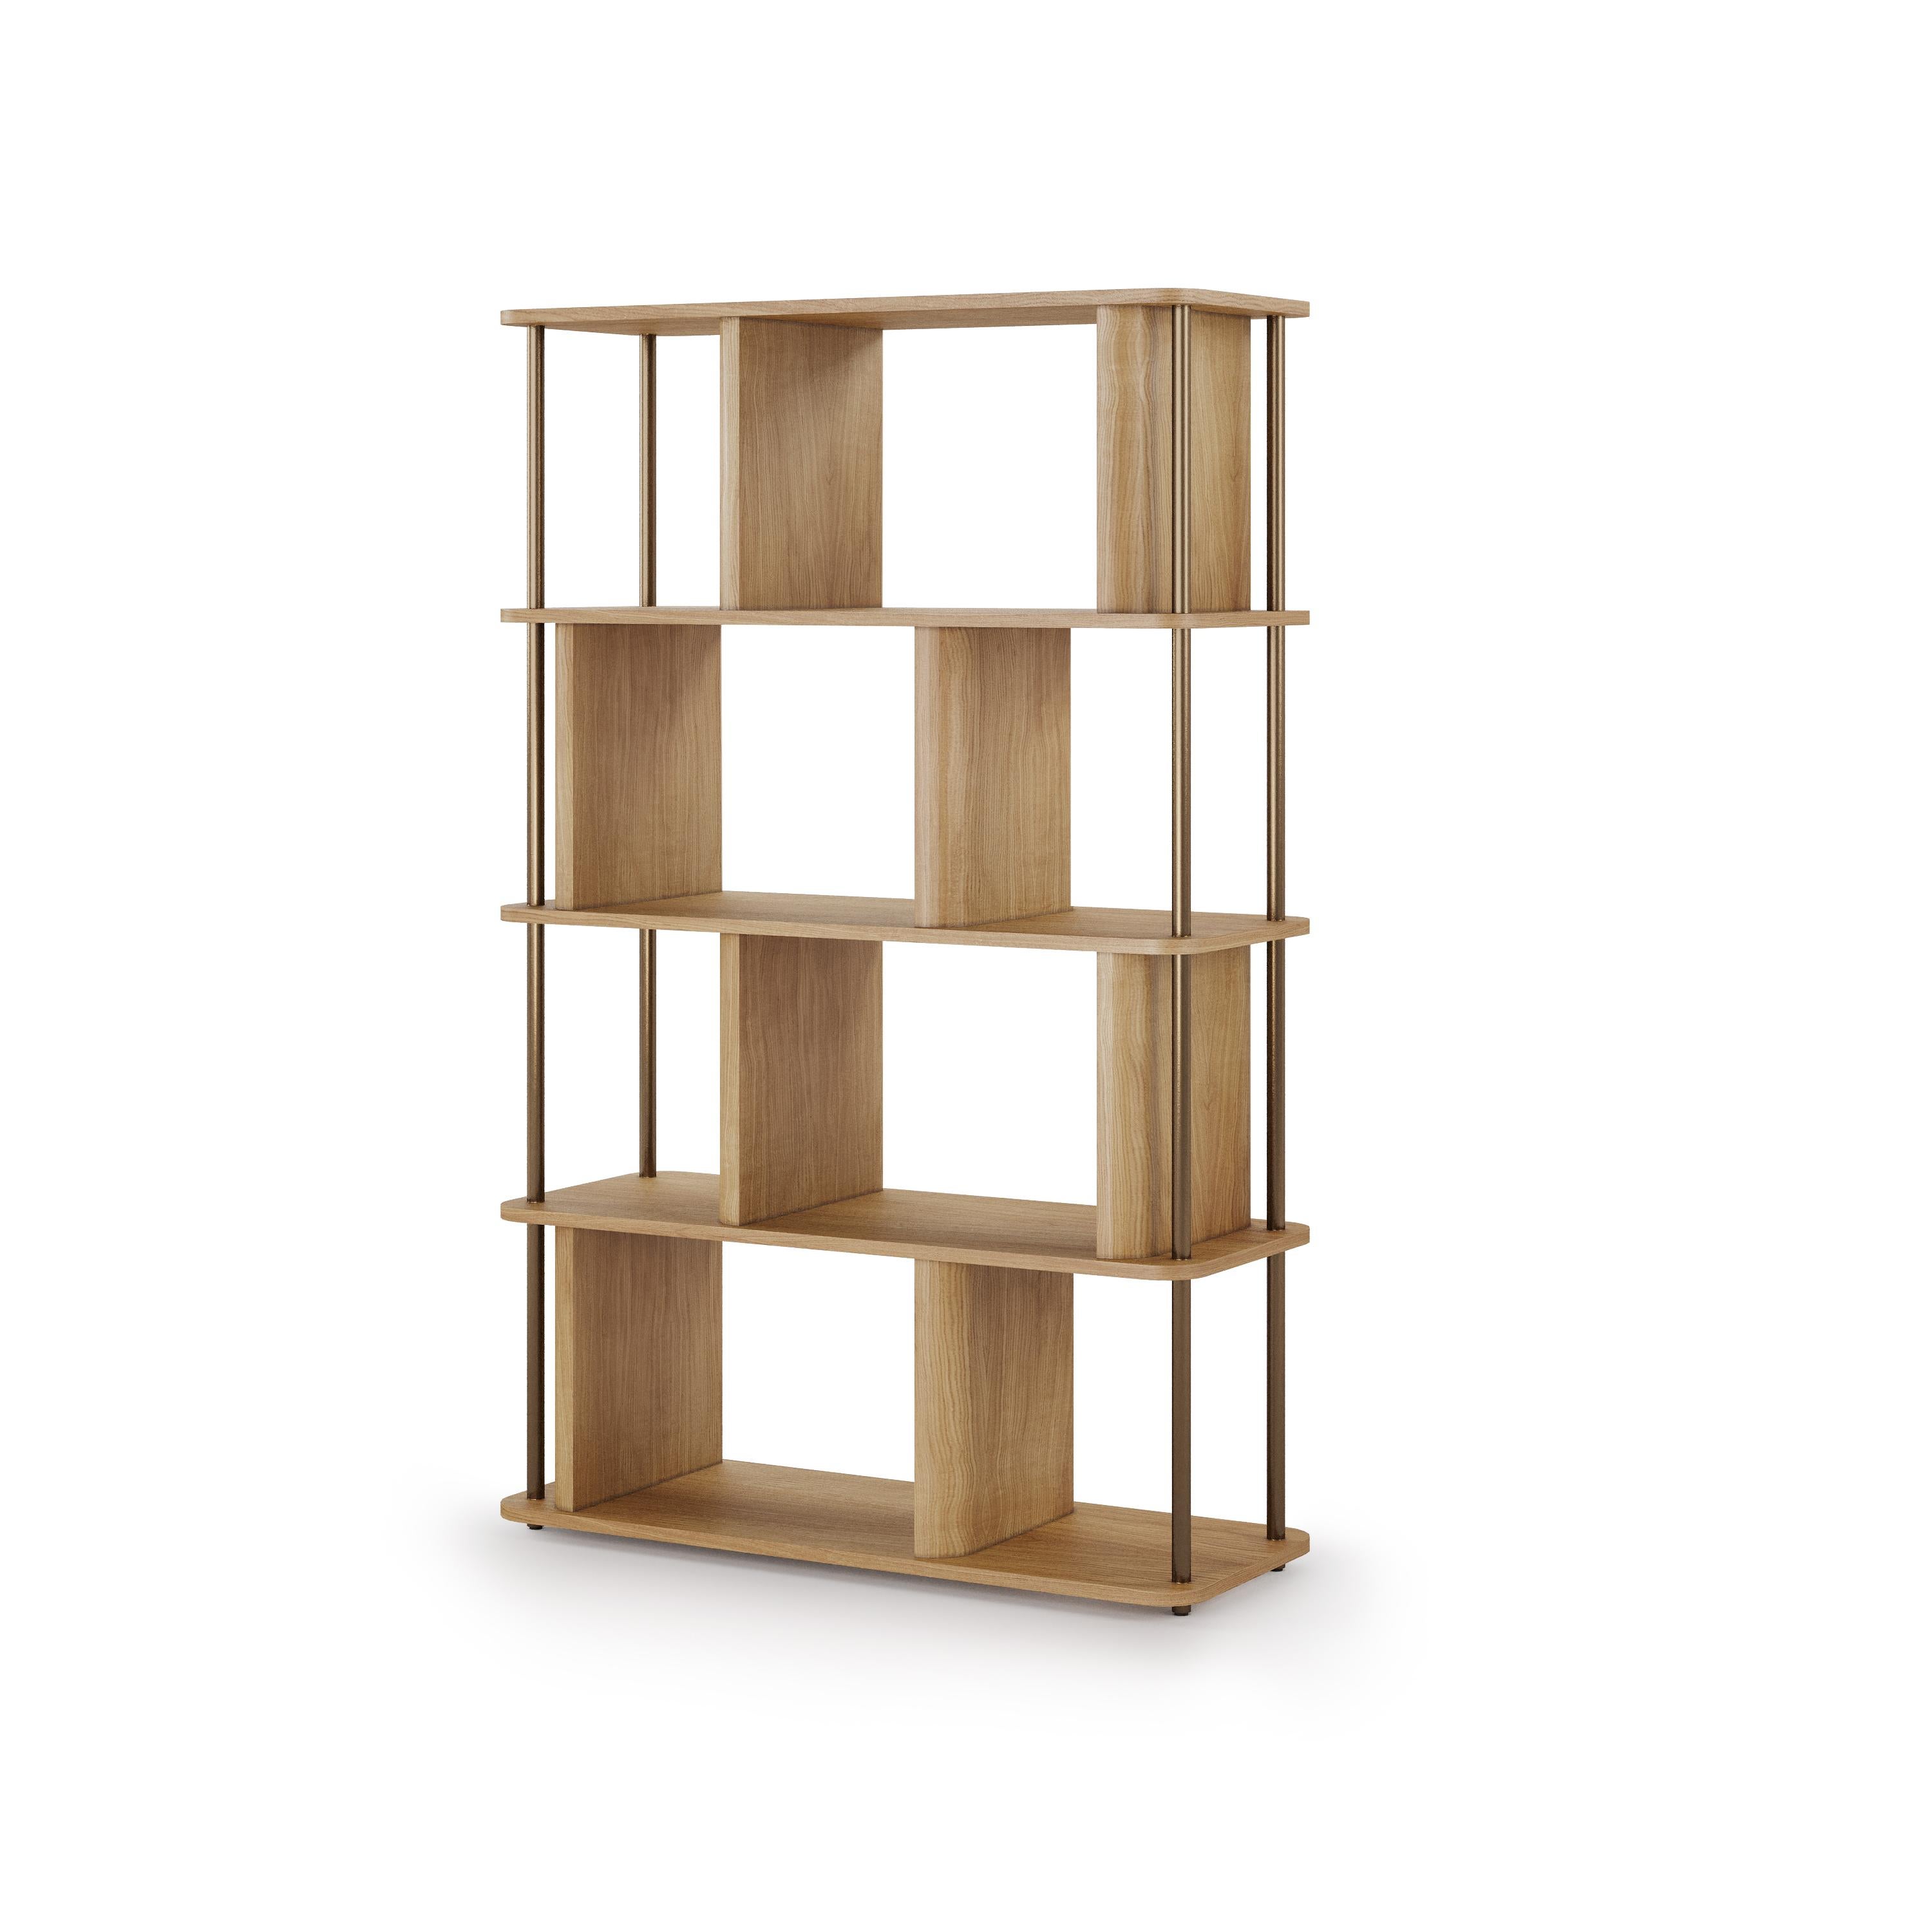 This contemporary bookcase is created in a handcrafted way, with simplicity and longevity in mind. With three shelves, perfect to accommodate your storage needs.